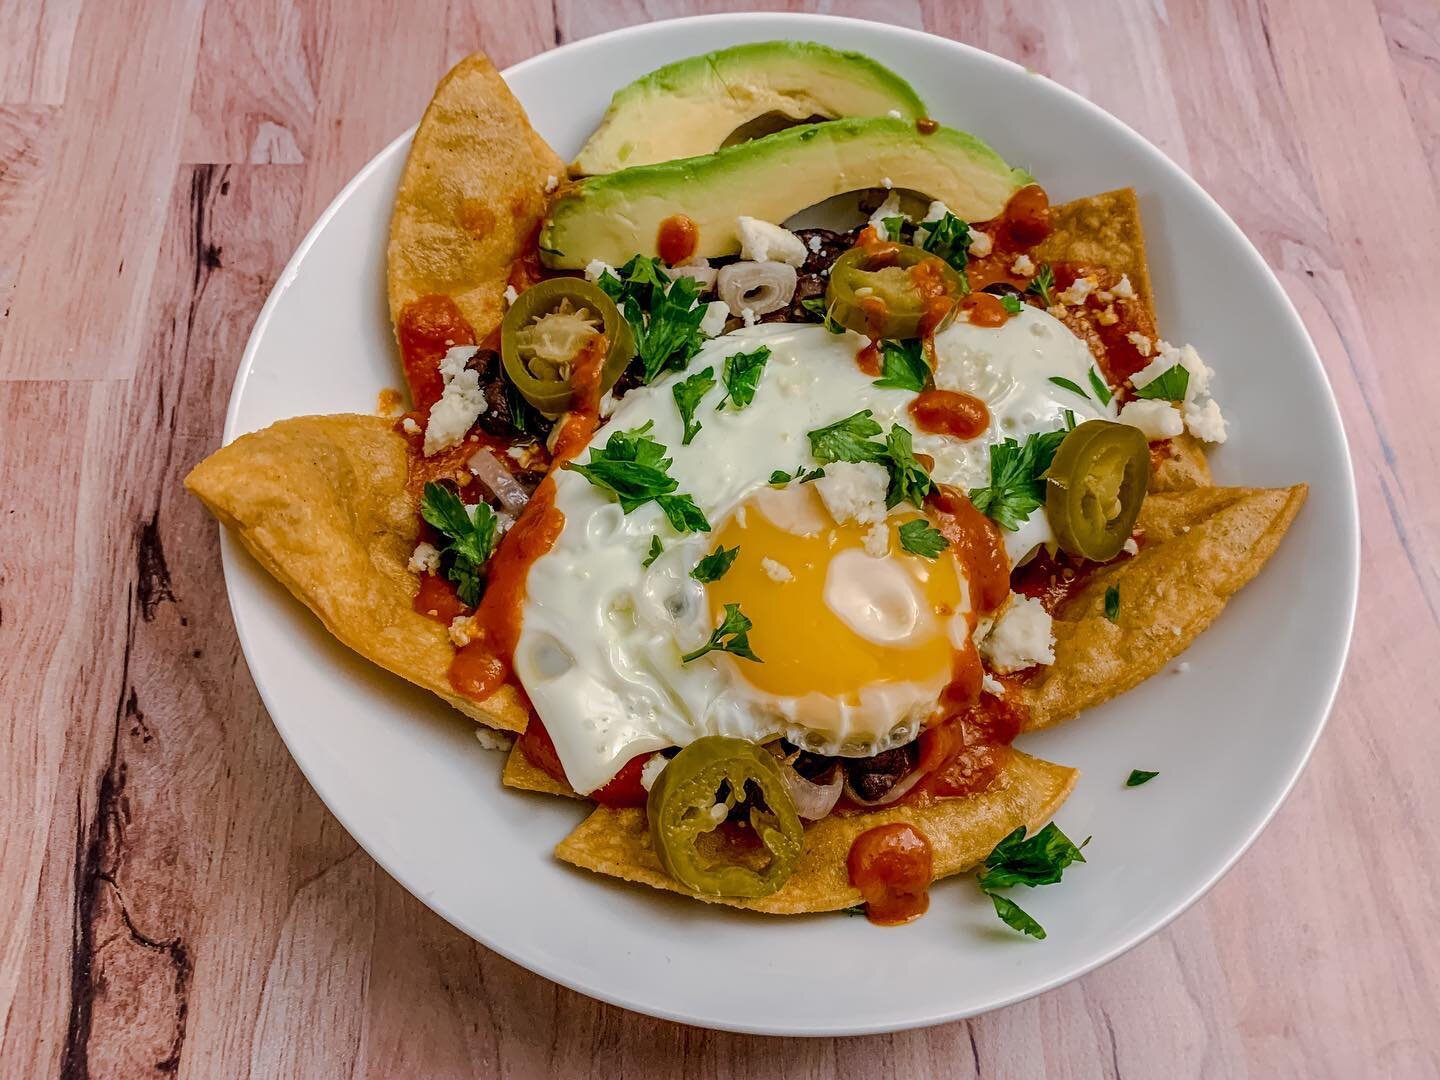 Joe made these chilaquiles and I am about to DIE over how good they are. The chips are even homemade! I&rsquo;m so glad I&rsquo;m with a man who can also cook.This recipe is from @acozykitchen and it is absolutely incredible. Please try these.
.
.
.
